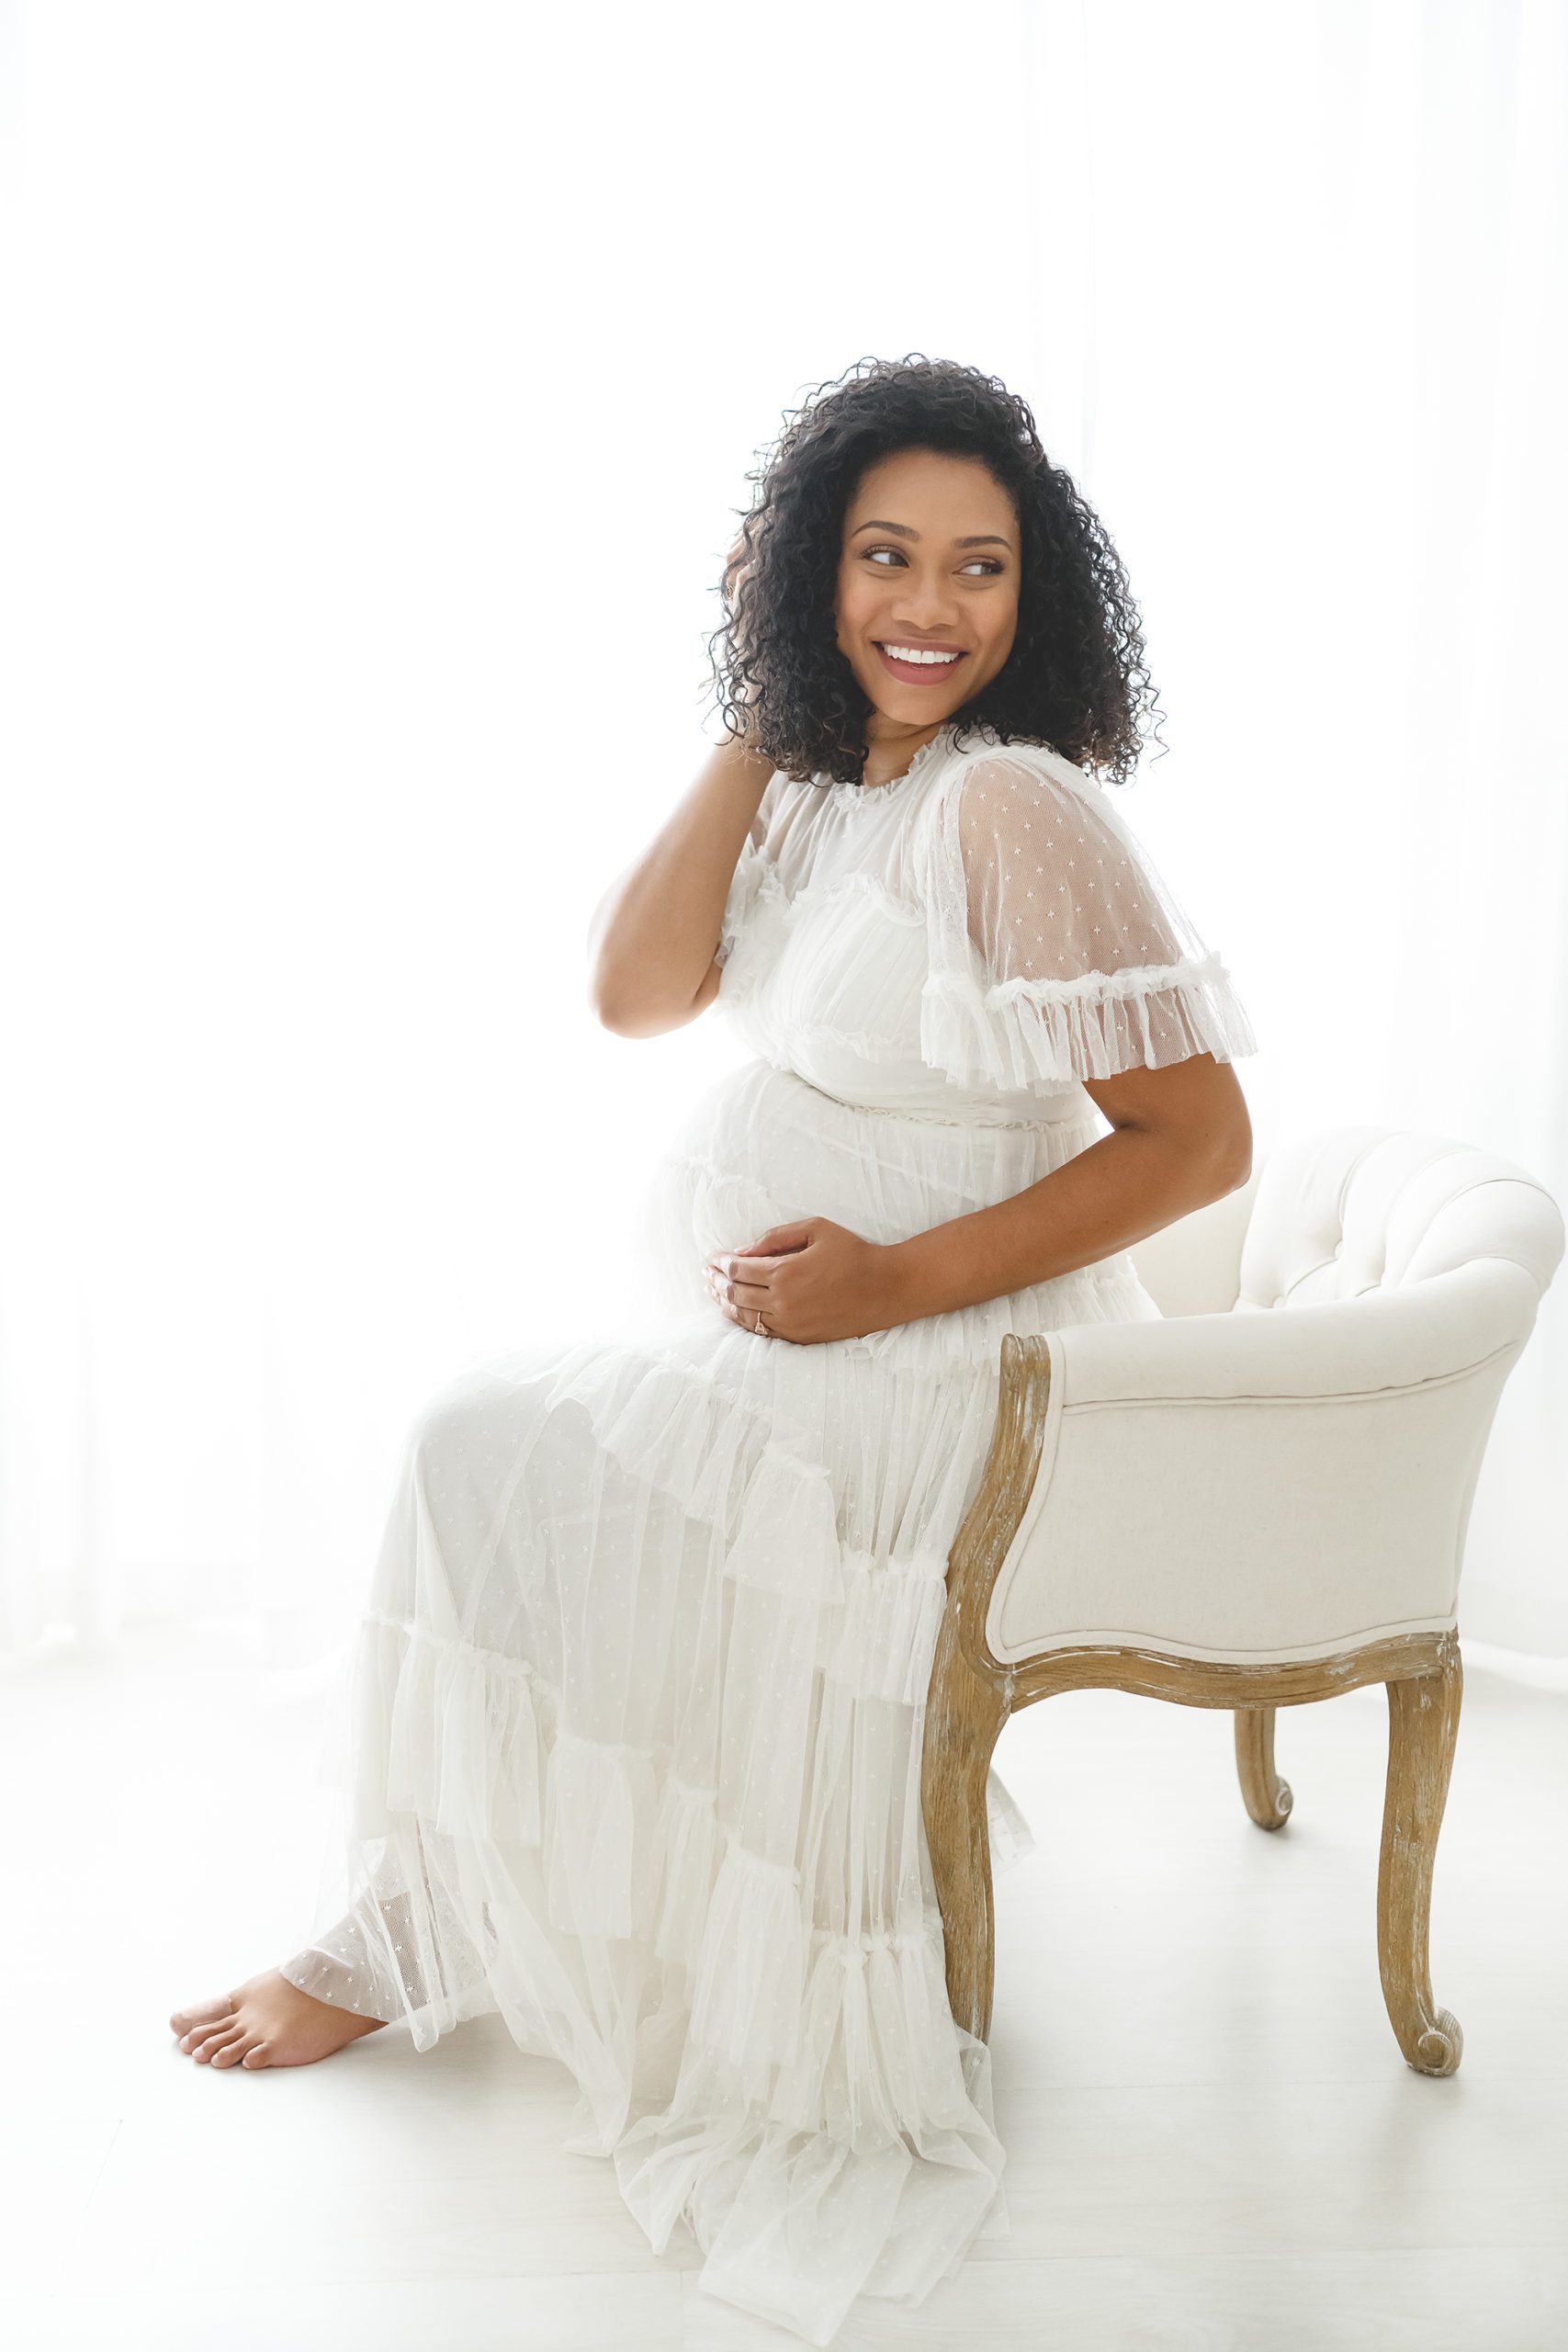 pregnant woman wearing white lace dress sitting in chair ©Reaj Roberts Photography